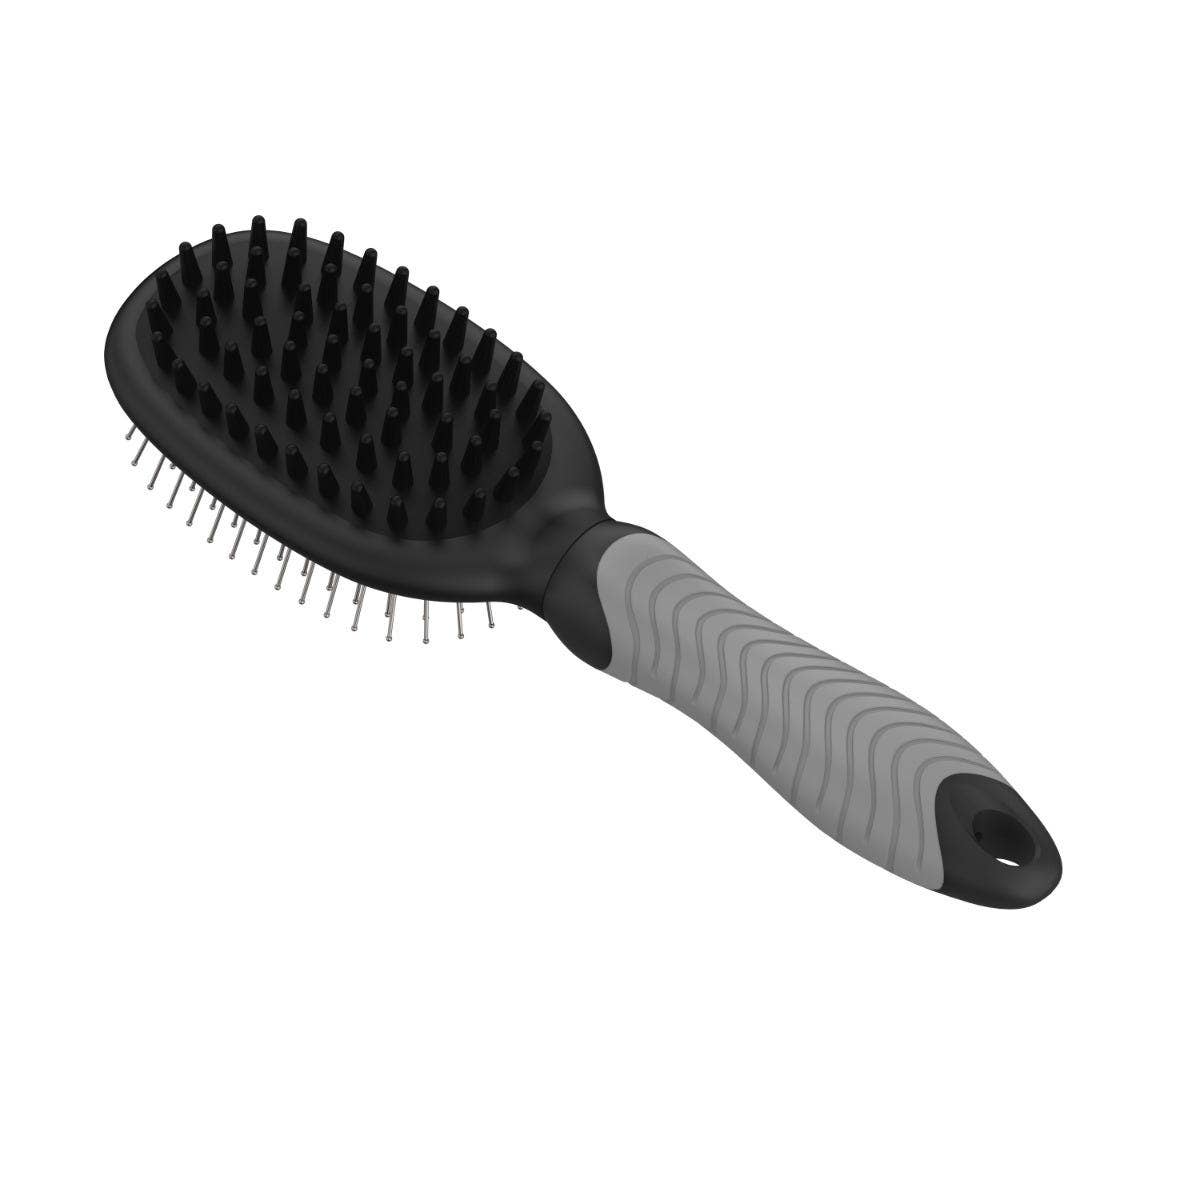 Wahl's Double Sided Bath Brush in black and gray.